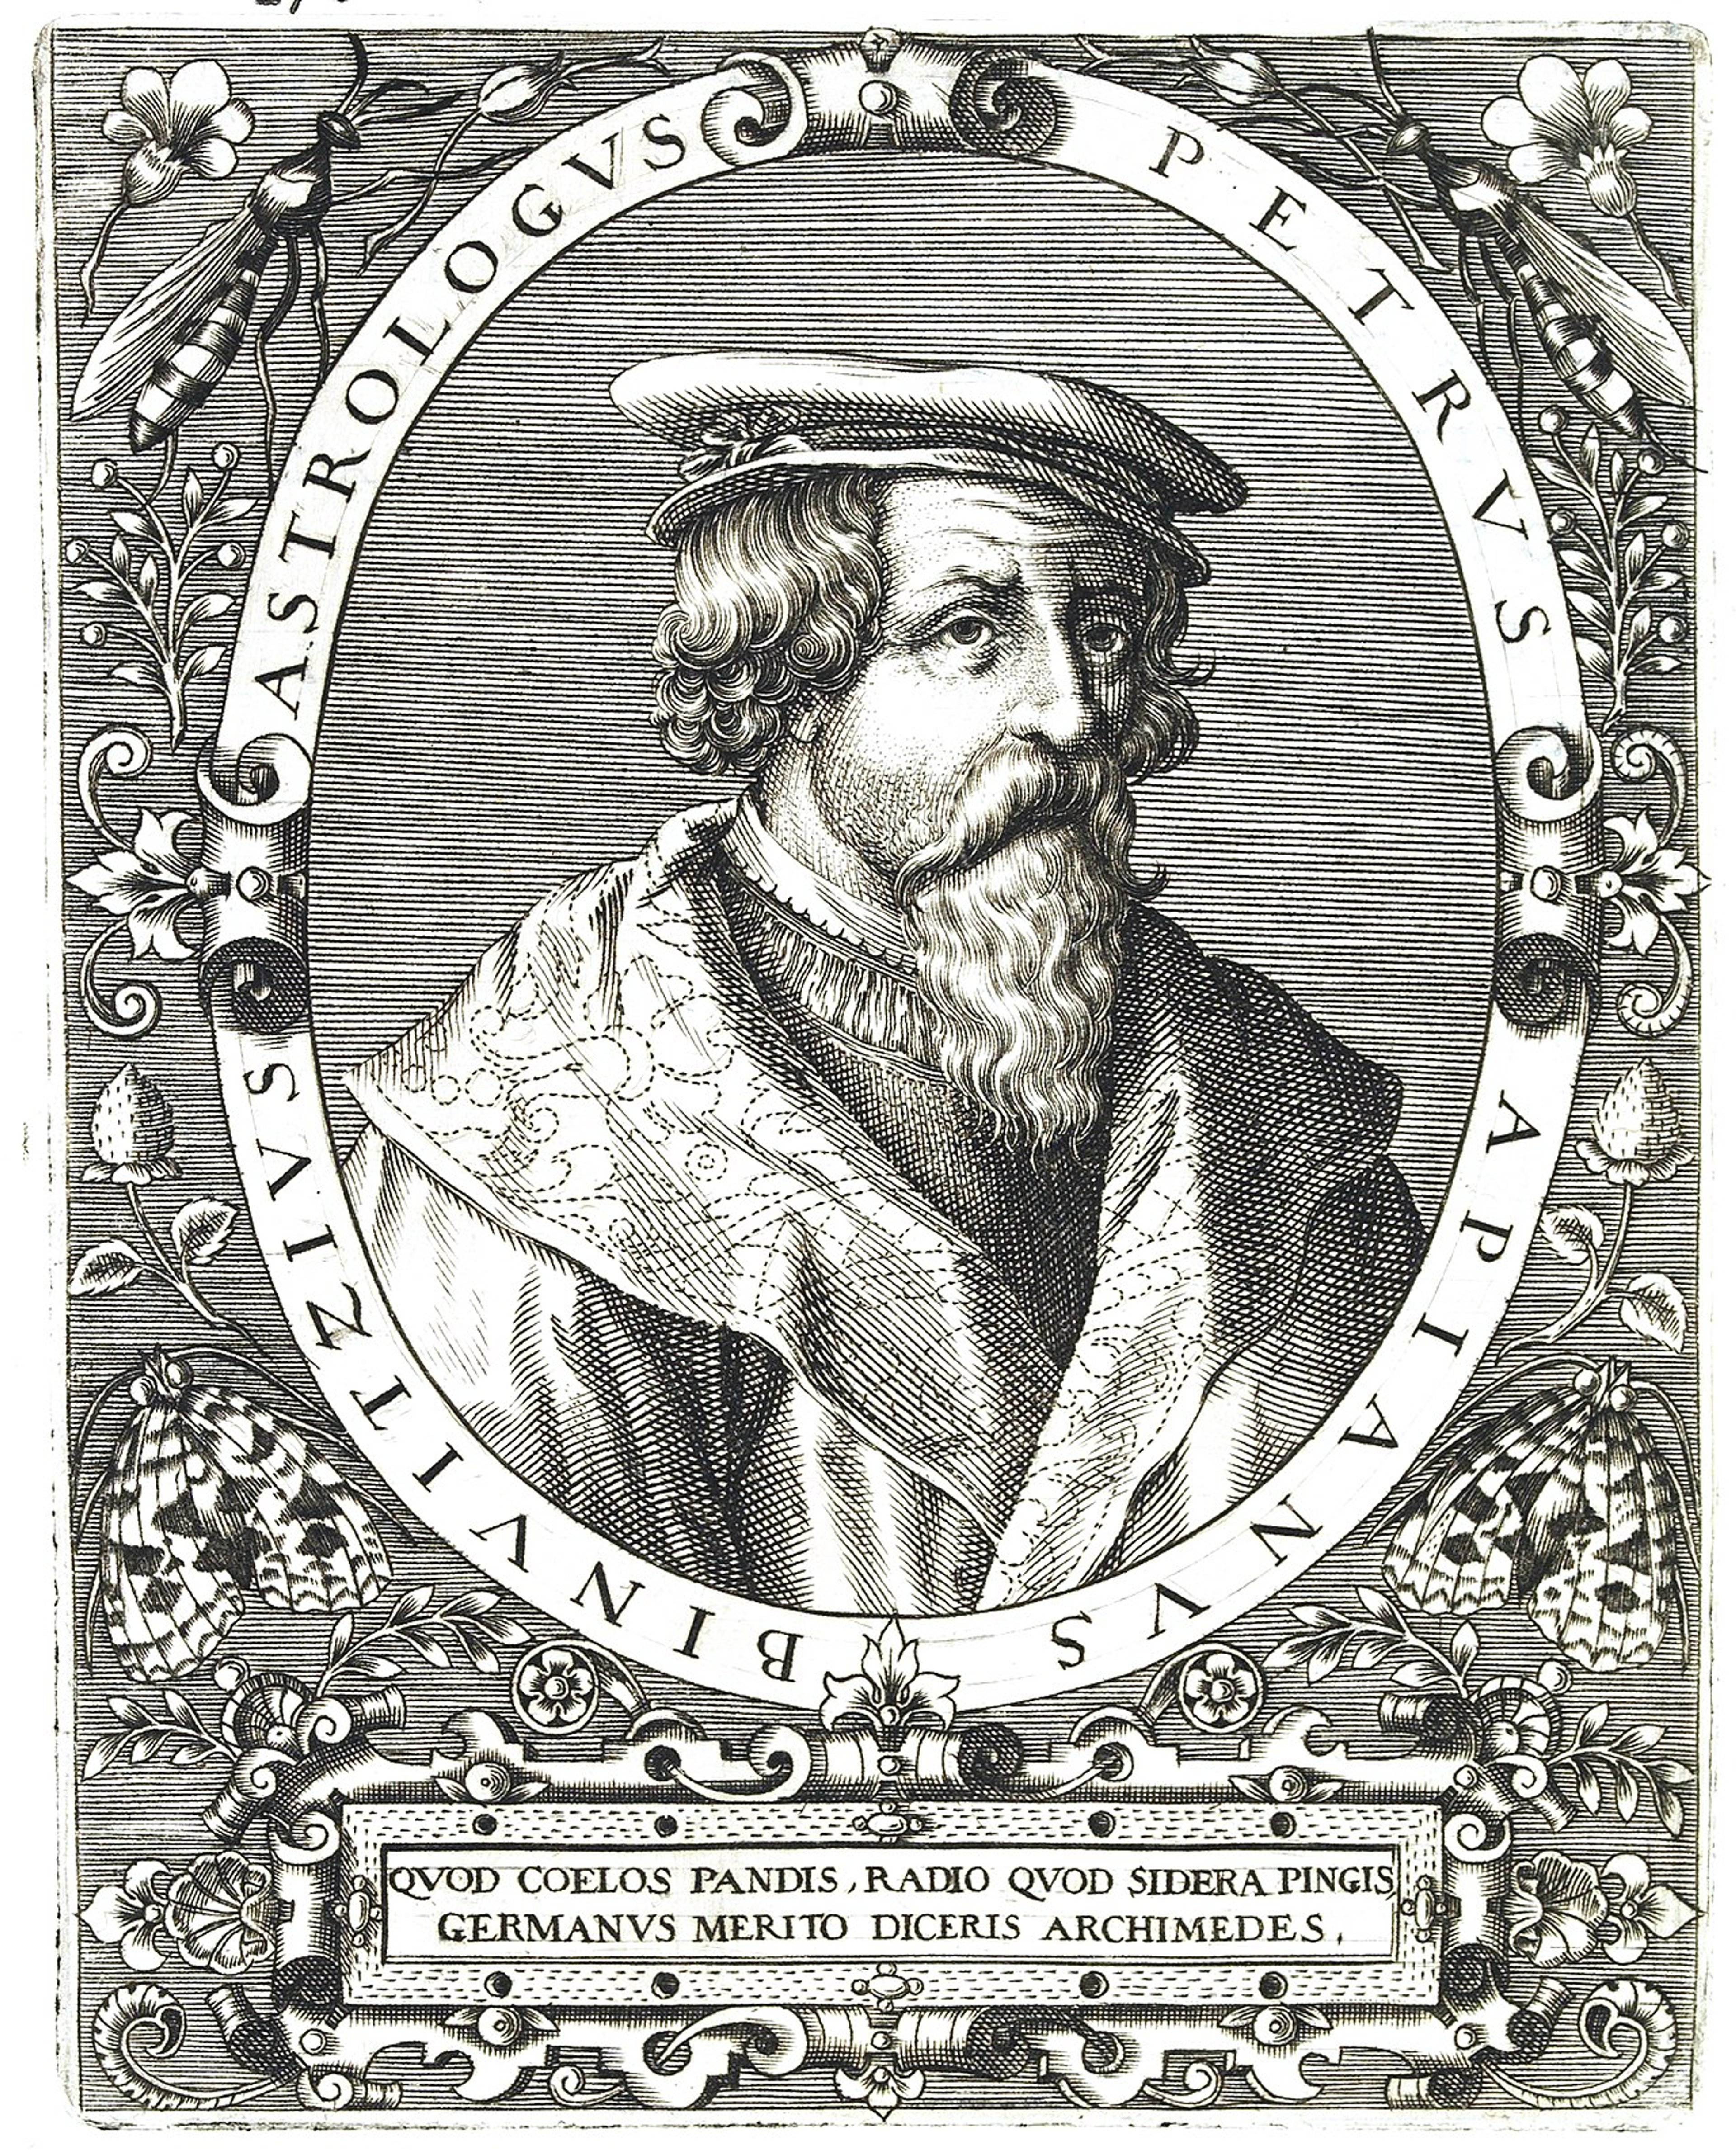 Black and white portrait of Petrus Apianus in an oval frame, a man with a beard and short dark hair. He is wearing a hat and robes. Around the outside of the oval frame there are decorative illustrations of insects and flowers.